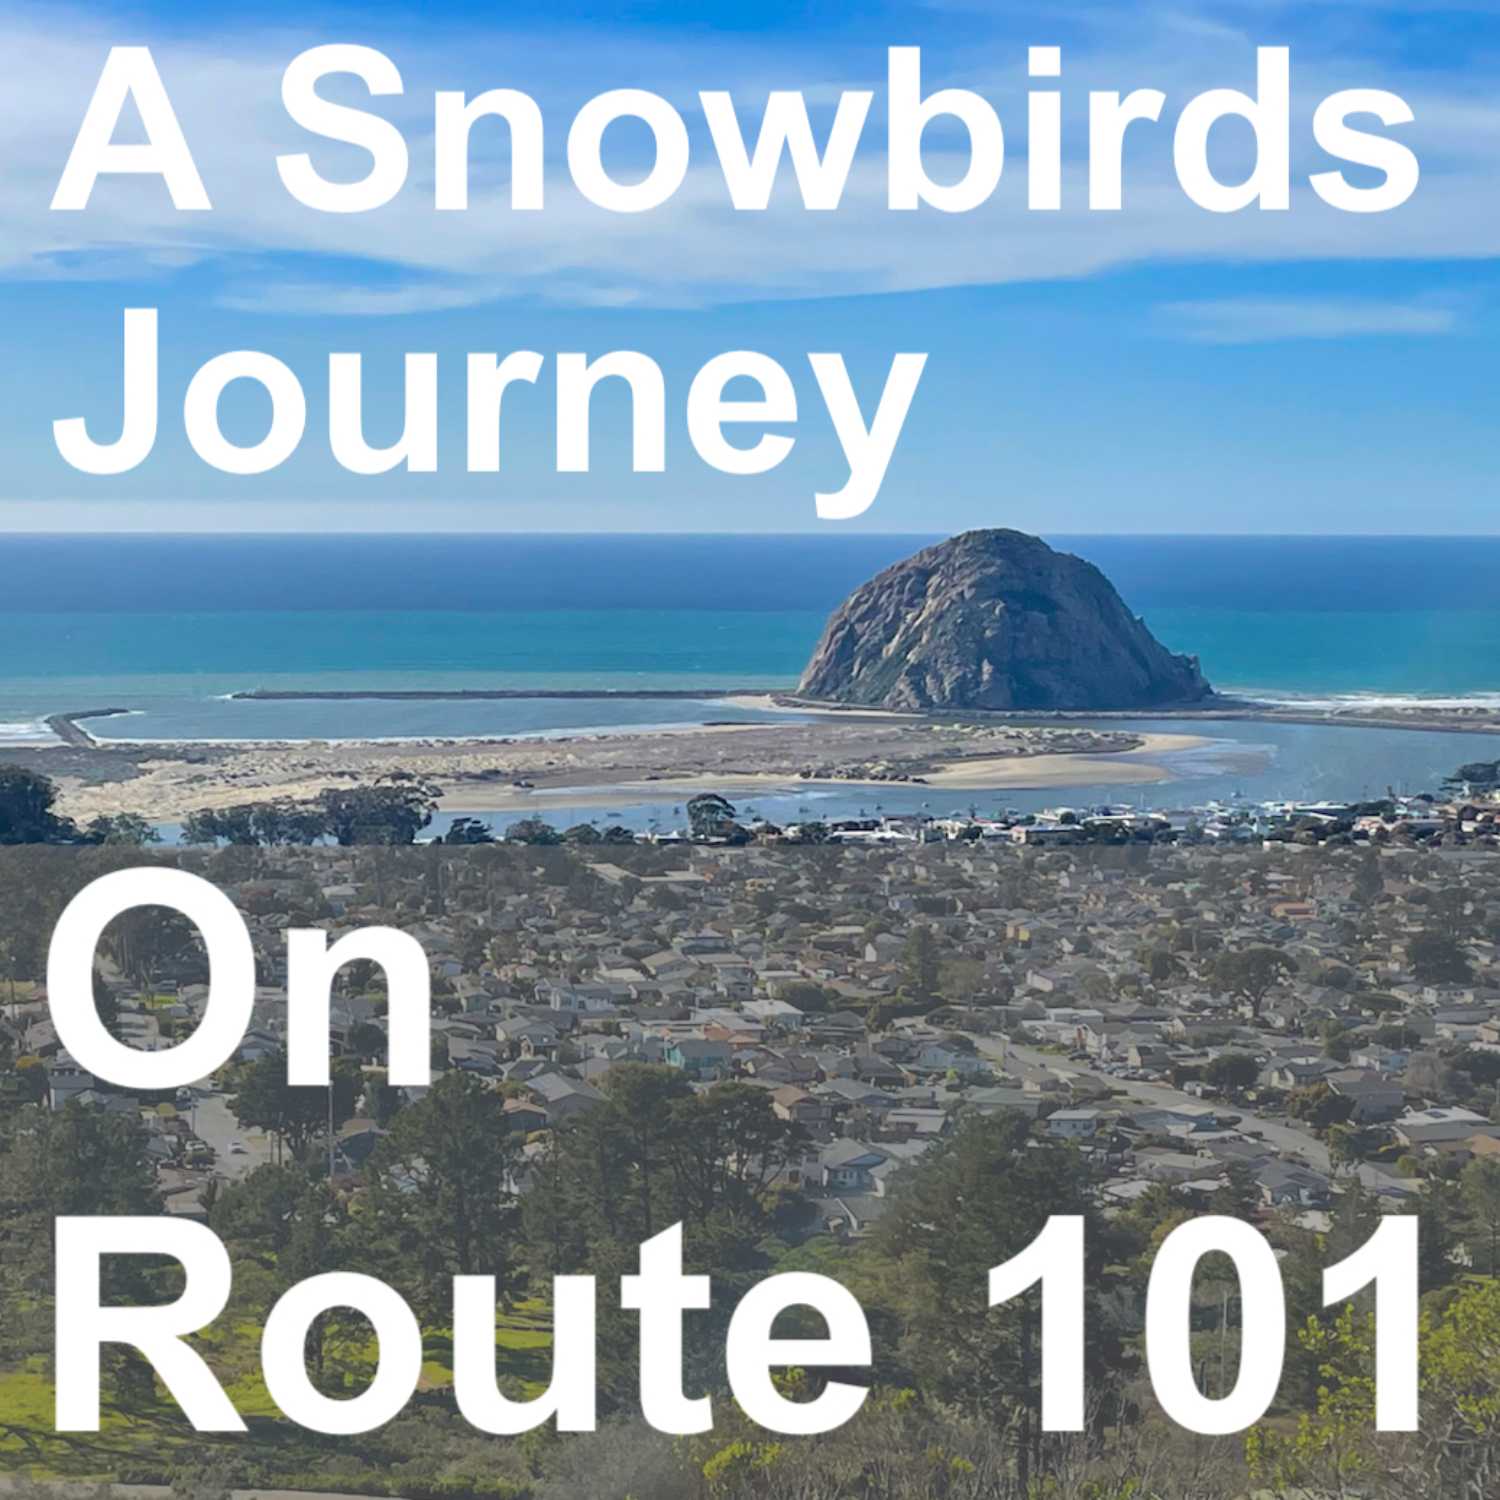 A Canadian Snowbird’s Journey on U.S. Route 101